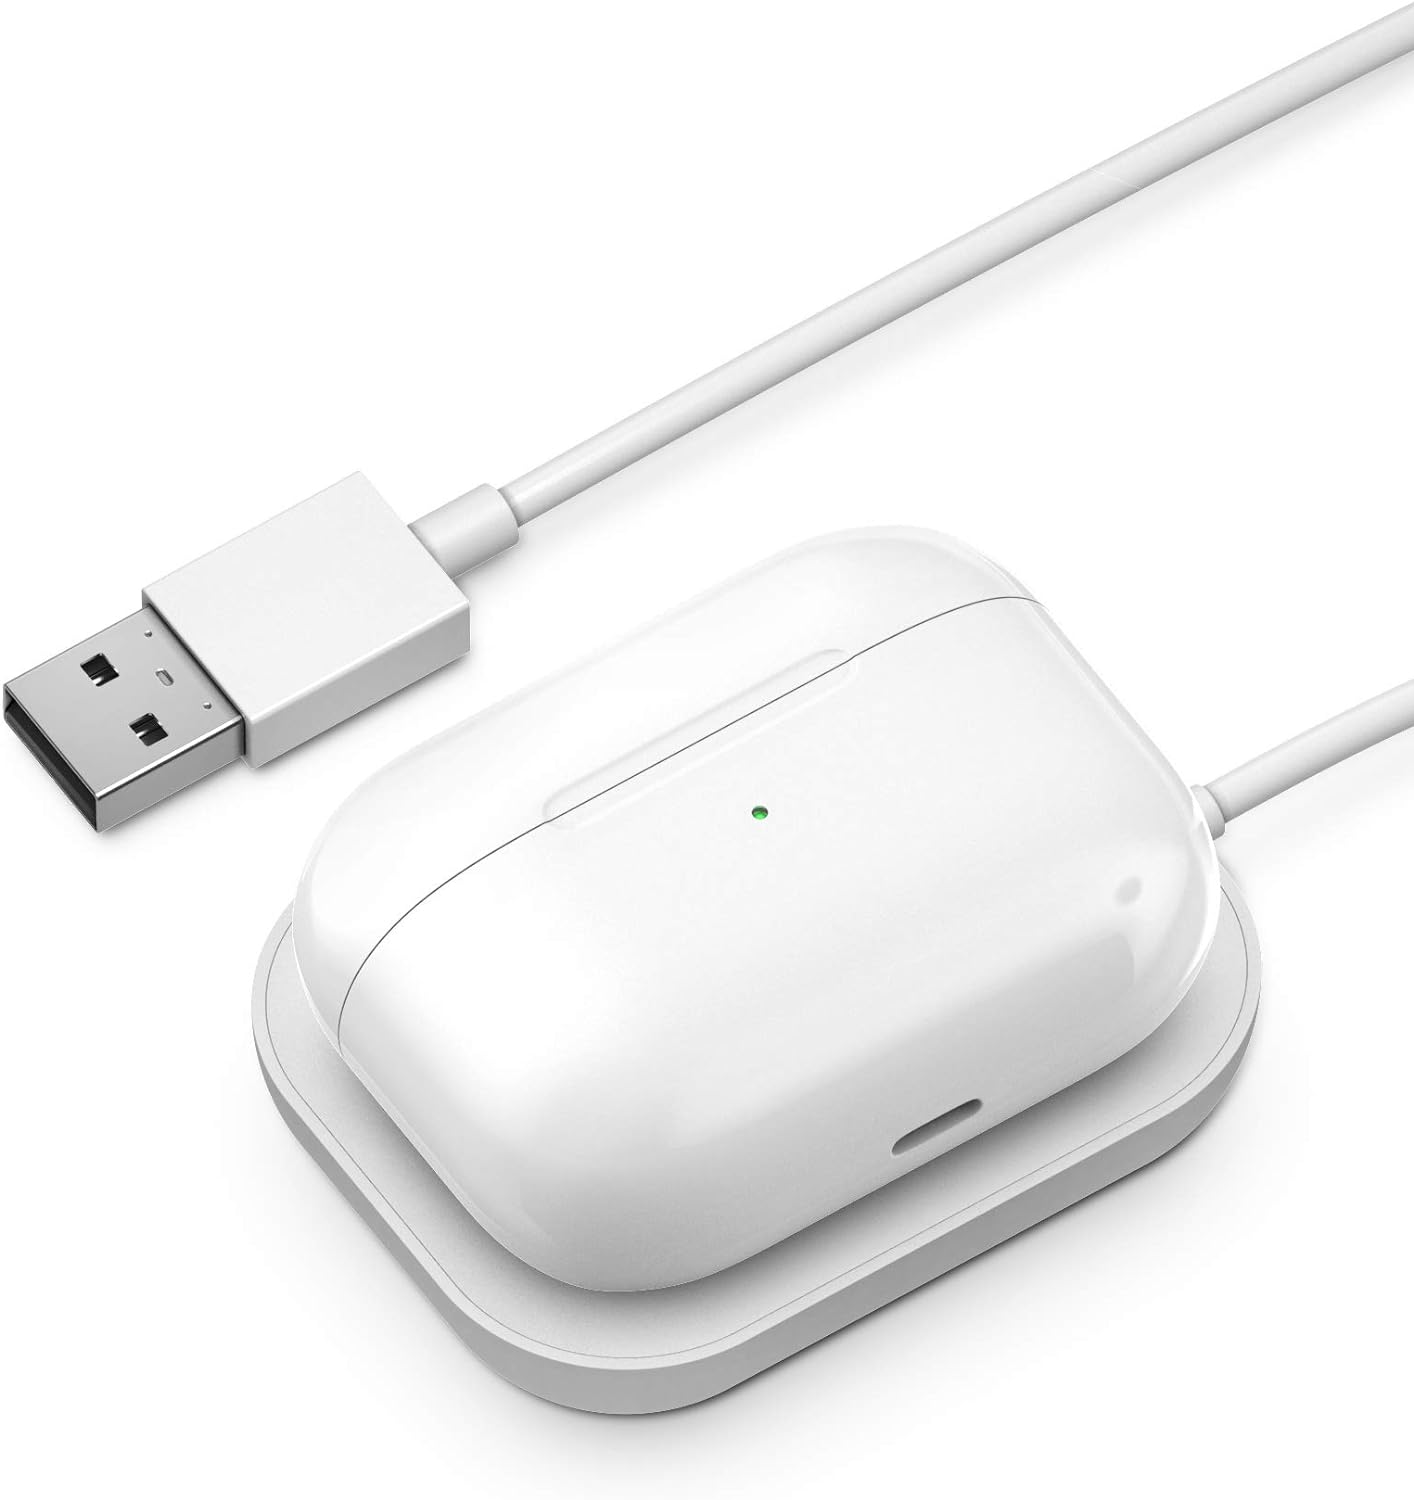 Identifying Wireless Charging Capabilities In Your AirPods